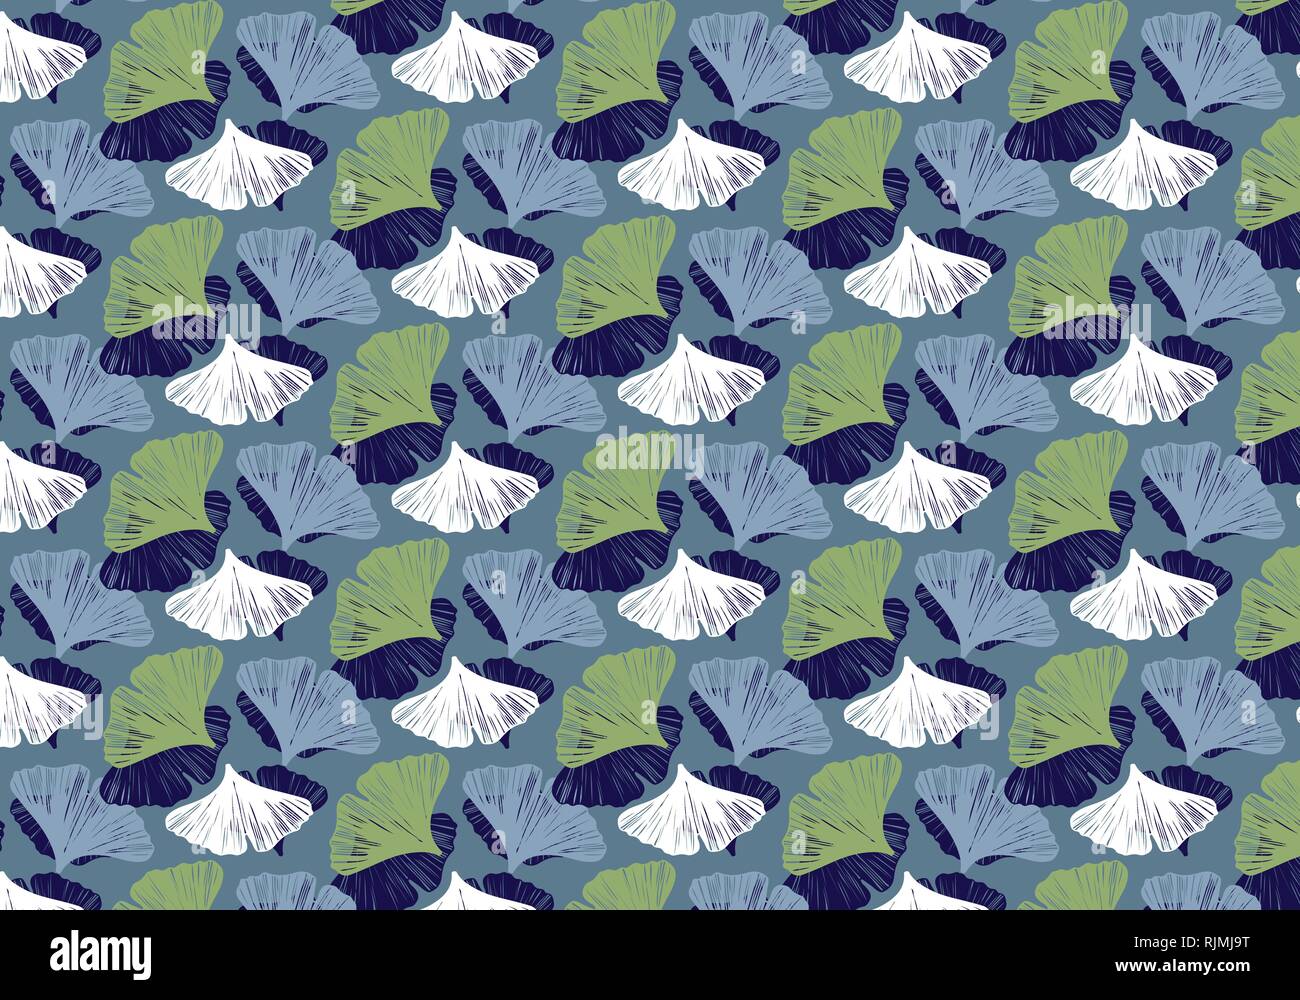 Ginkgo leaves vector pattern in blue, green and white colors palette Stock Vector